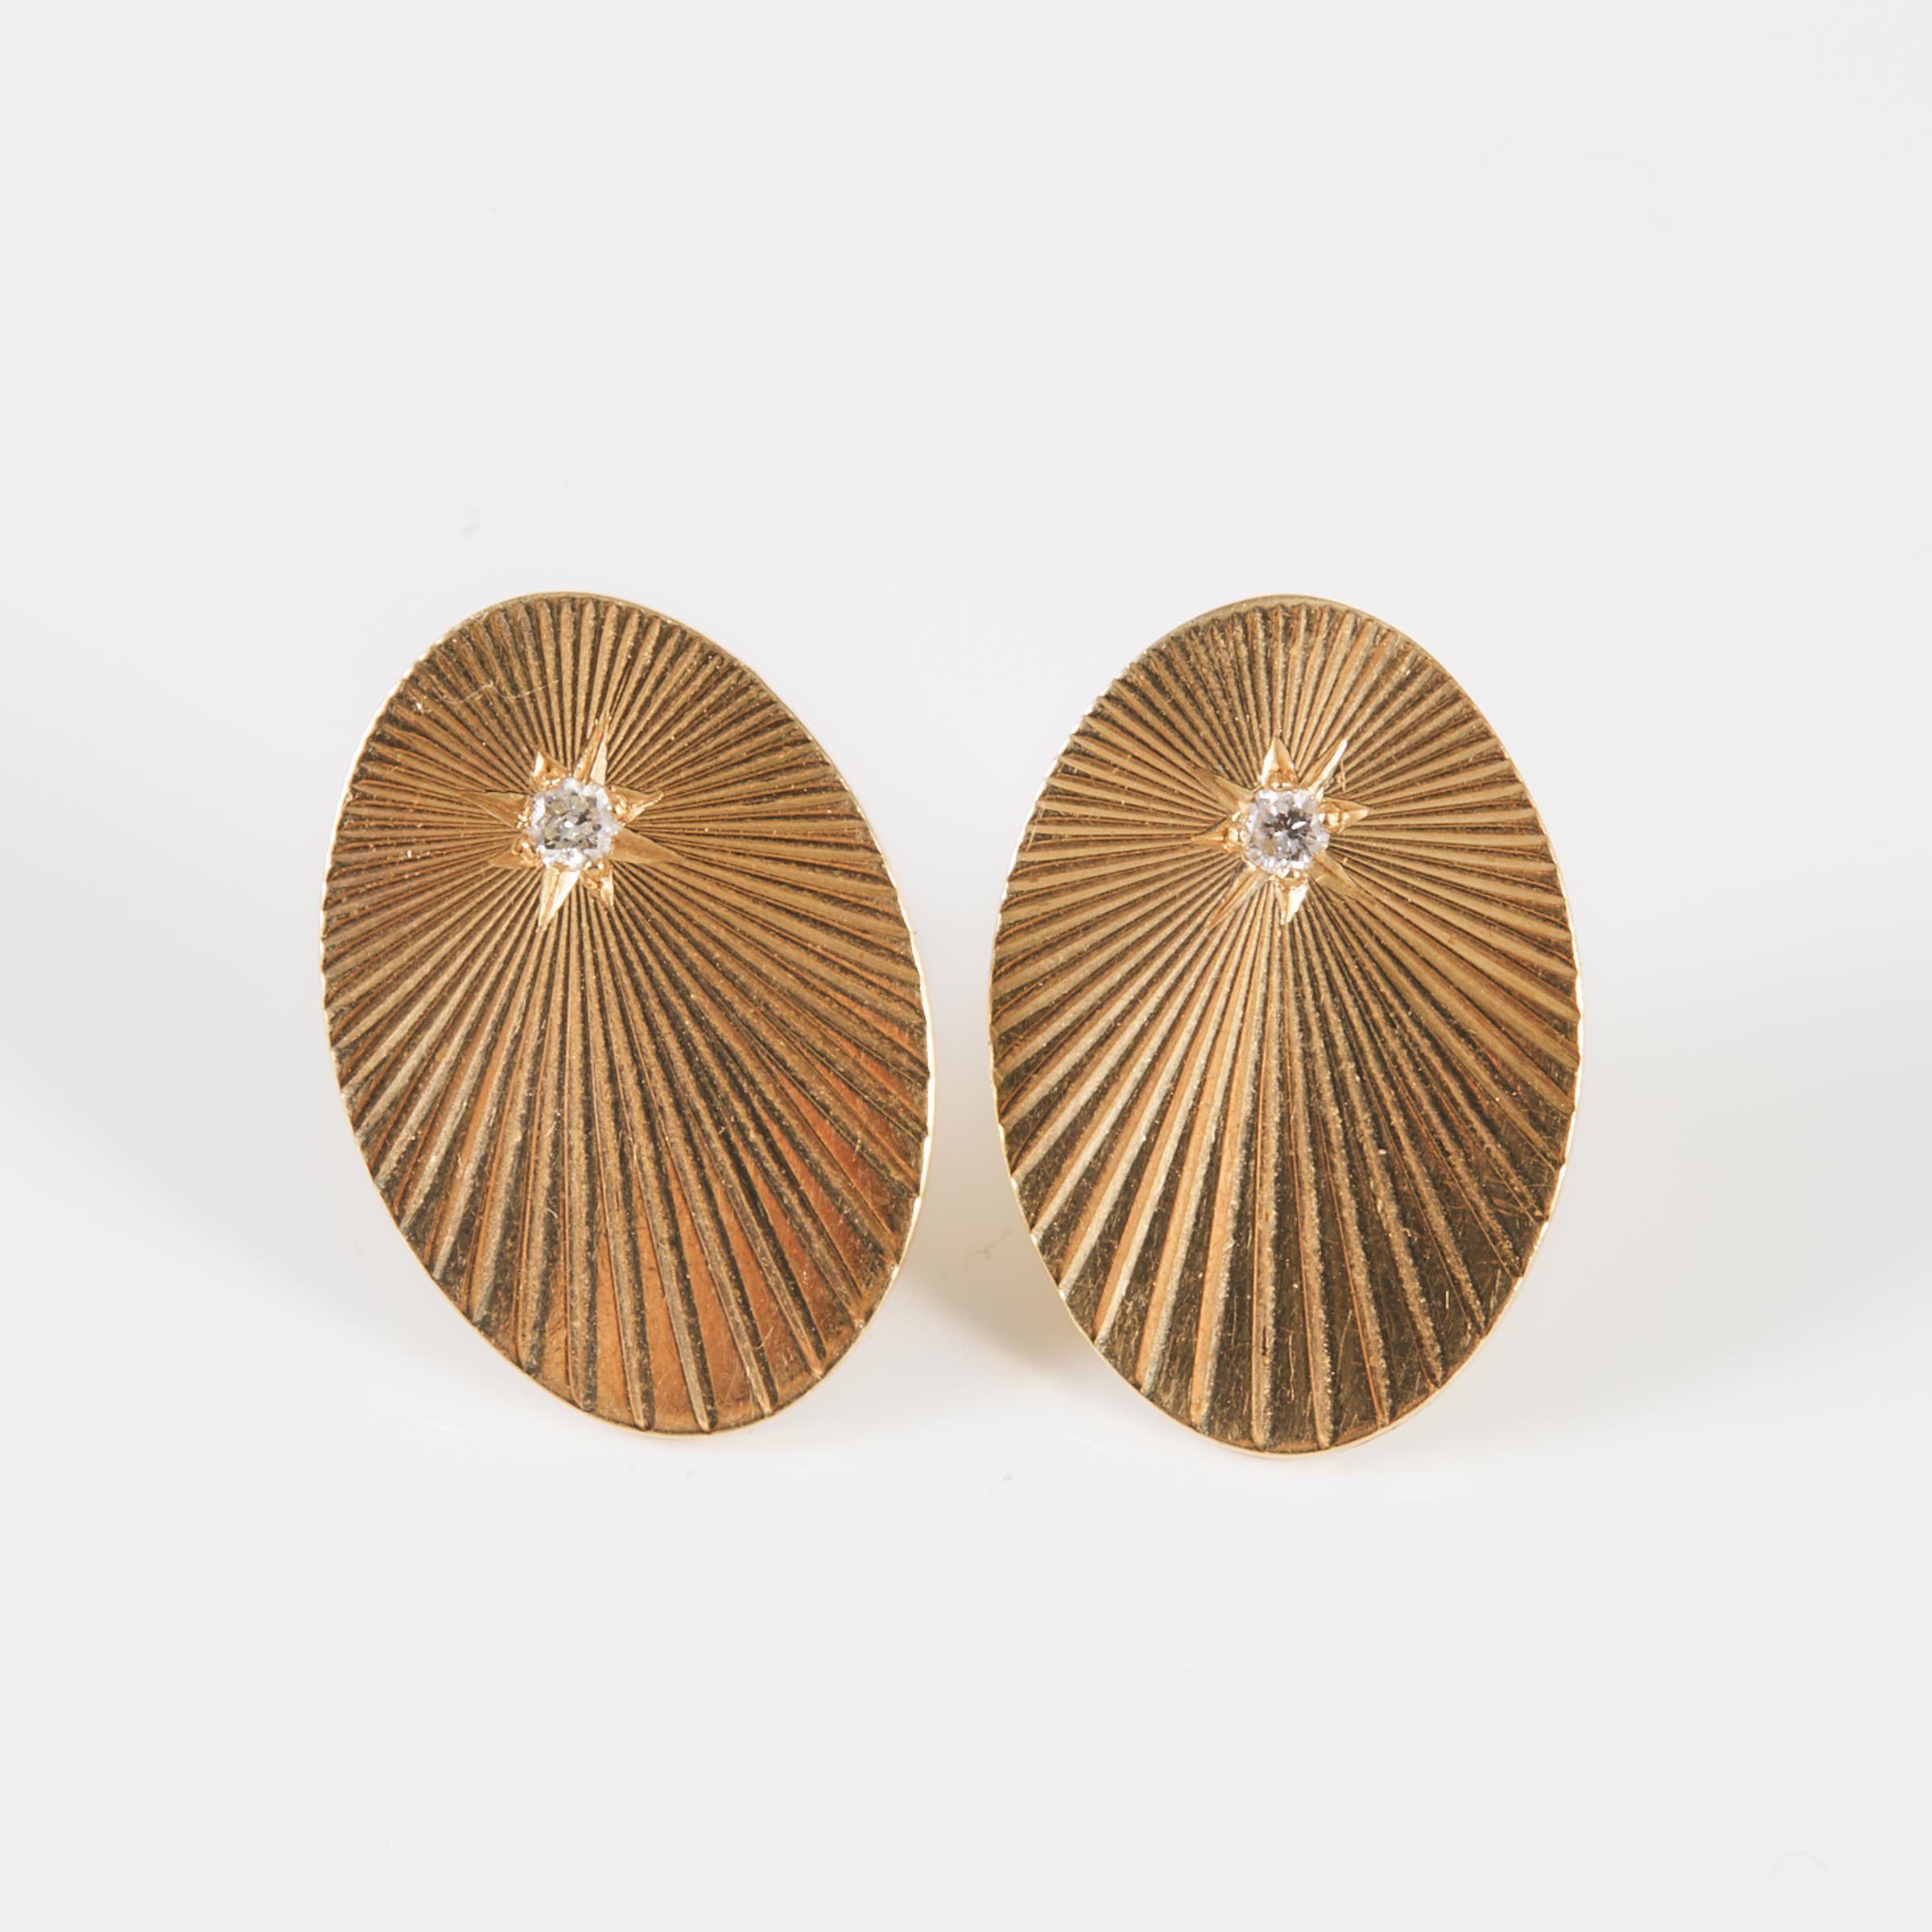 Pair Of 14k Yellow Gold Oval Earrings